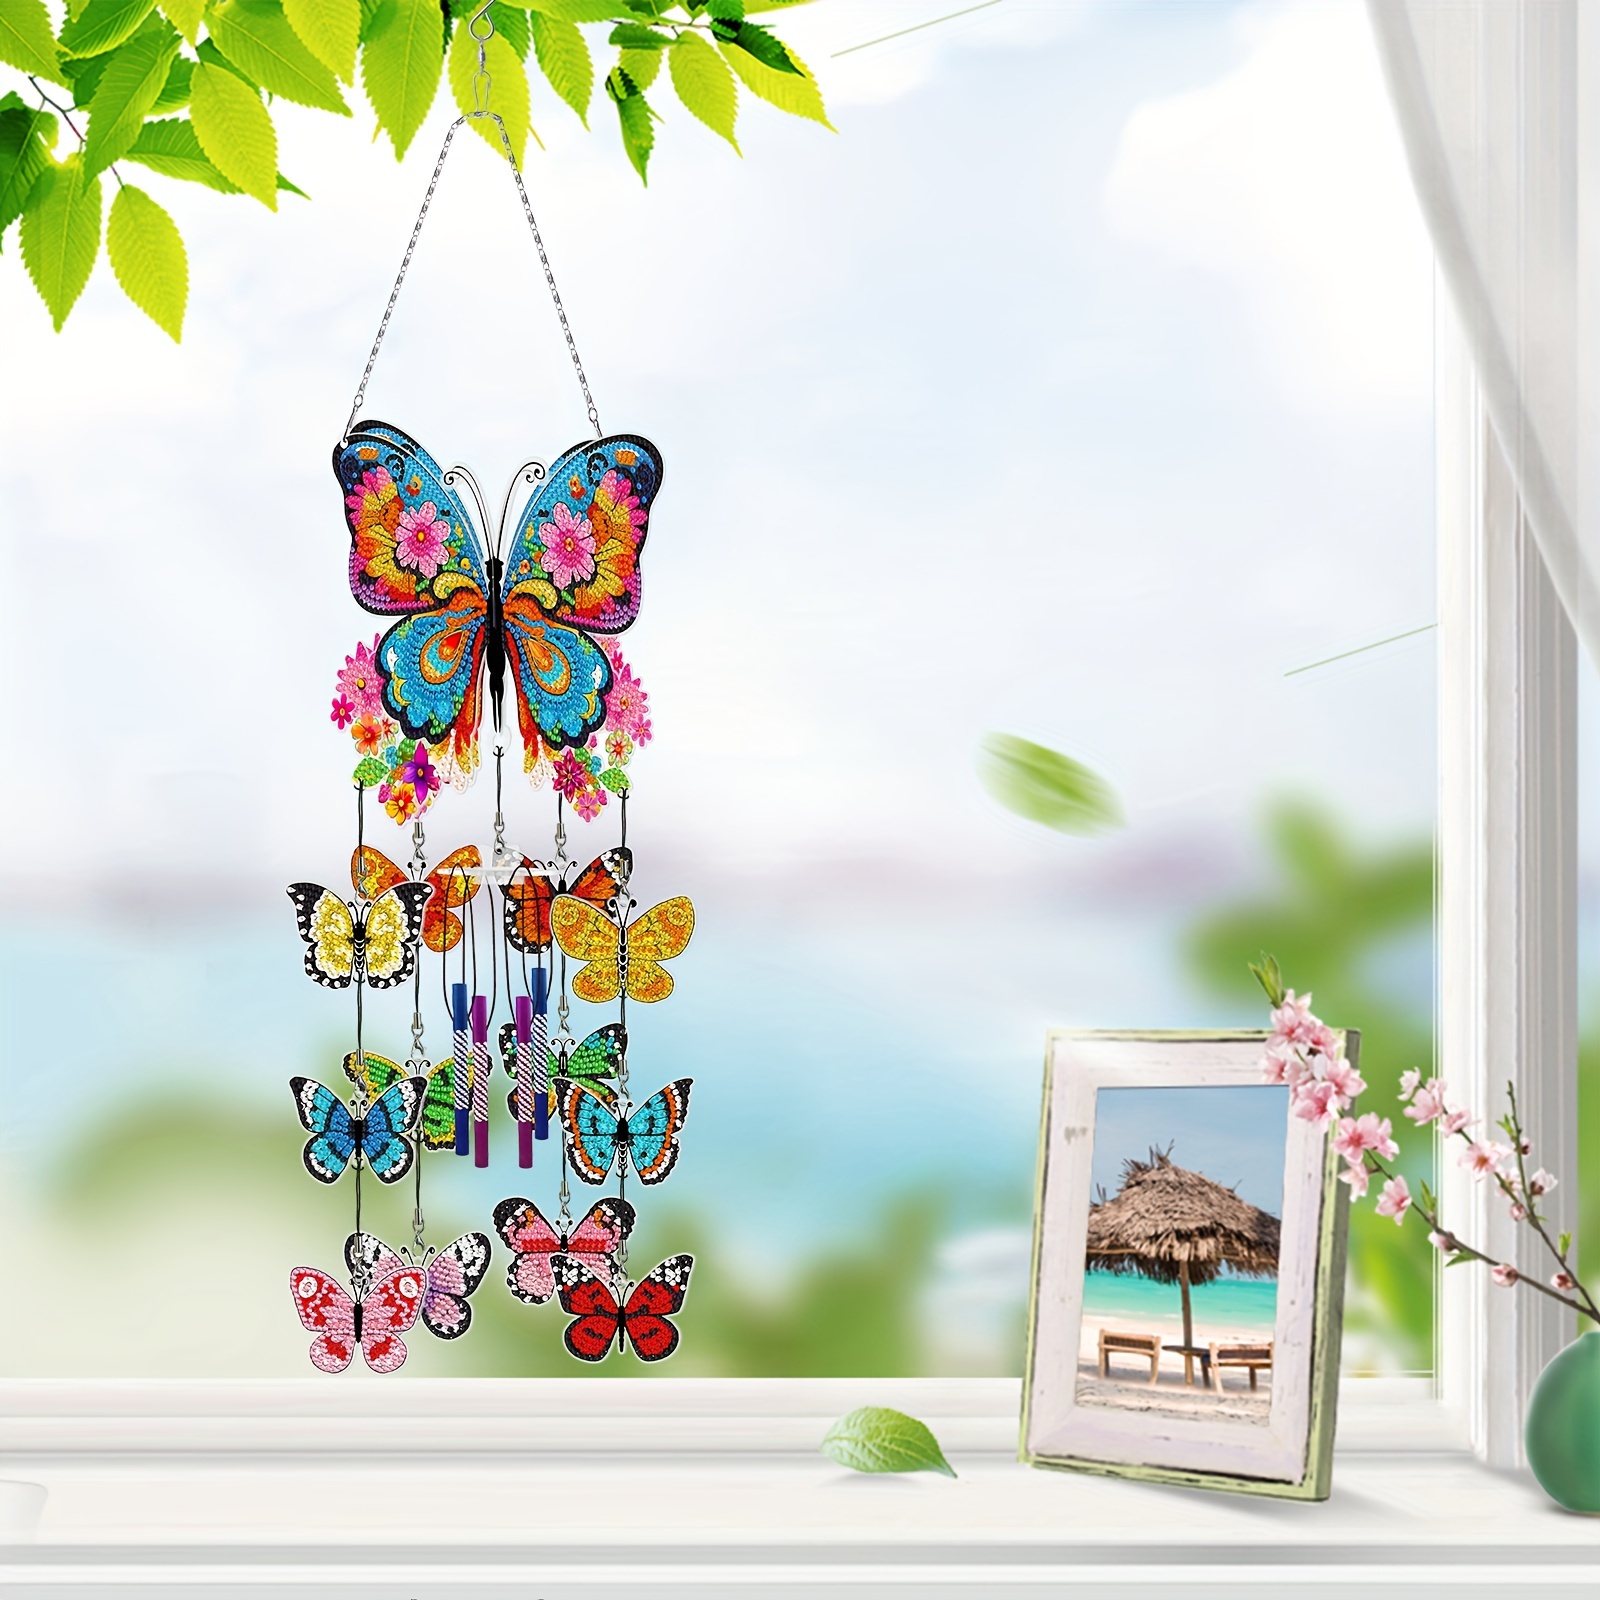 

artisan" Diy Diamond Painting Wind Chime Kit - Colorful Butterfly & Floral Design, 3d Handcrafted Pvc Hanging Decor For Home, Garden, And Window